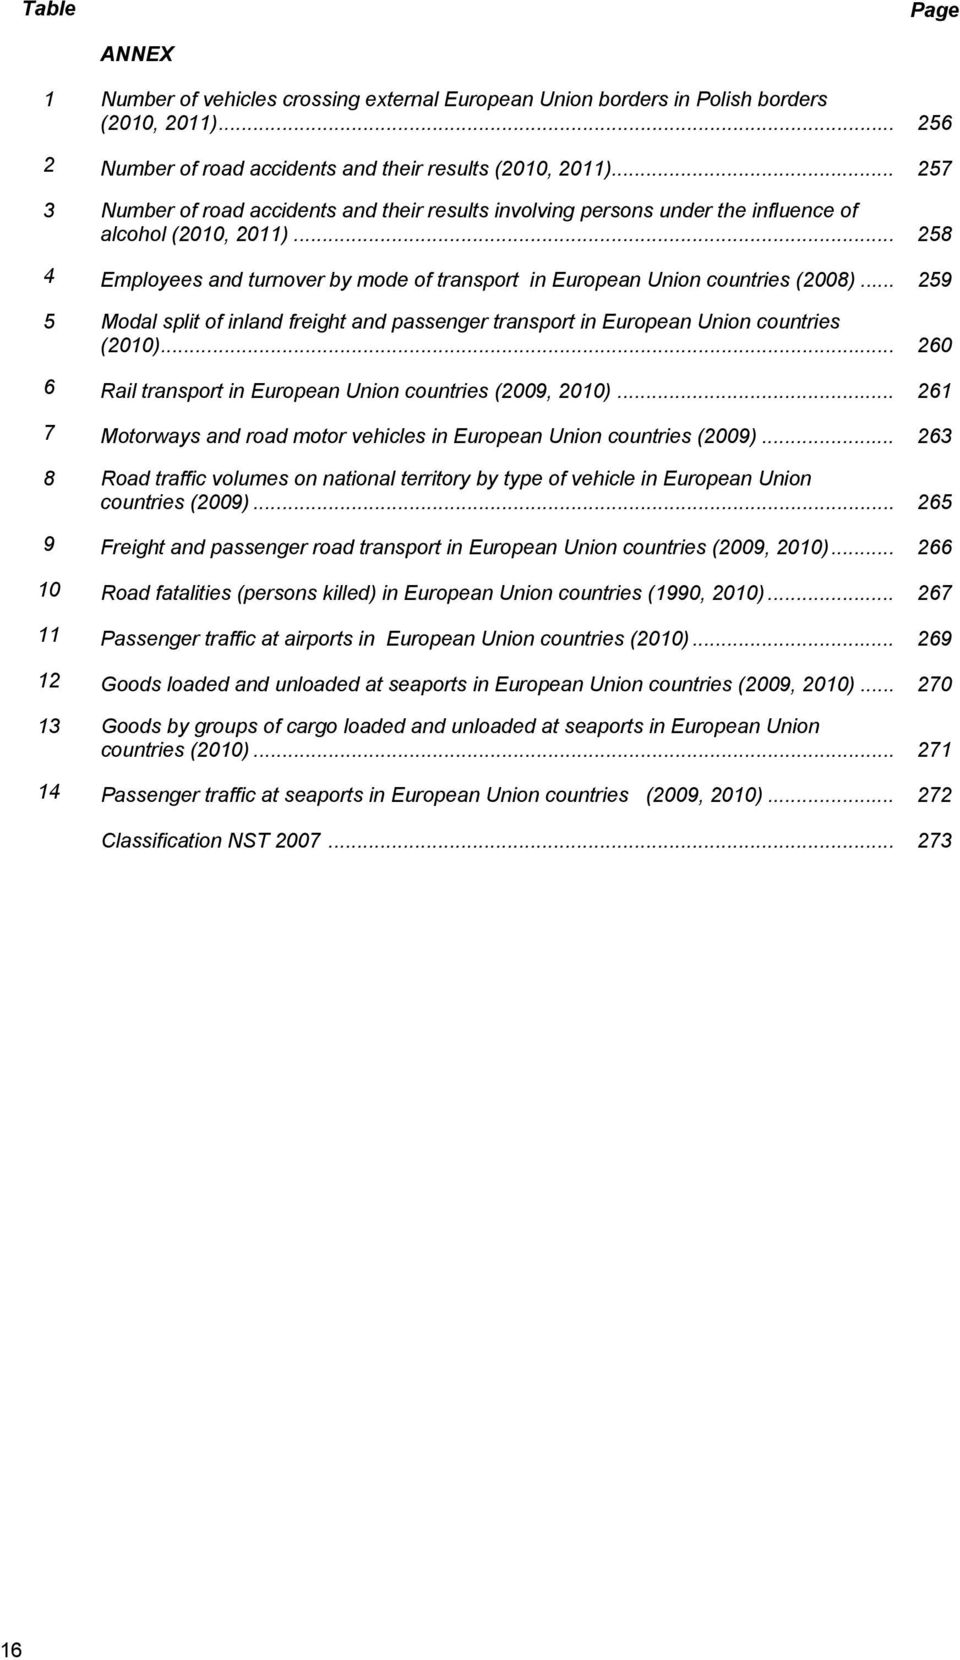 .. 259 5 Modal split of inland freight and passenger transport in European Union countries (2010)... 260 6 Rail transport in European Union countries (2009, 2010).